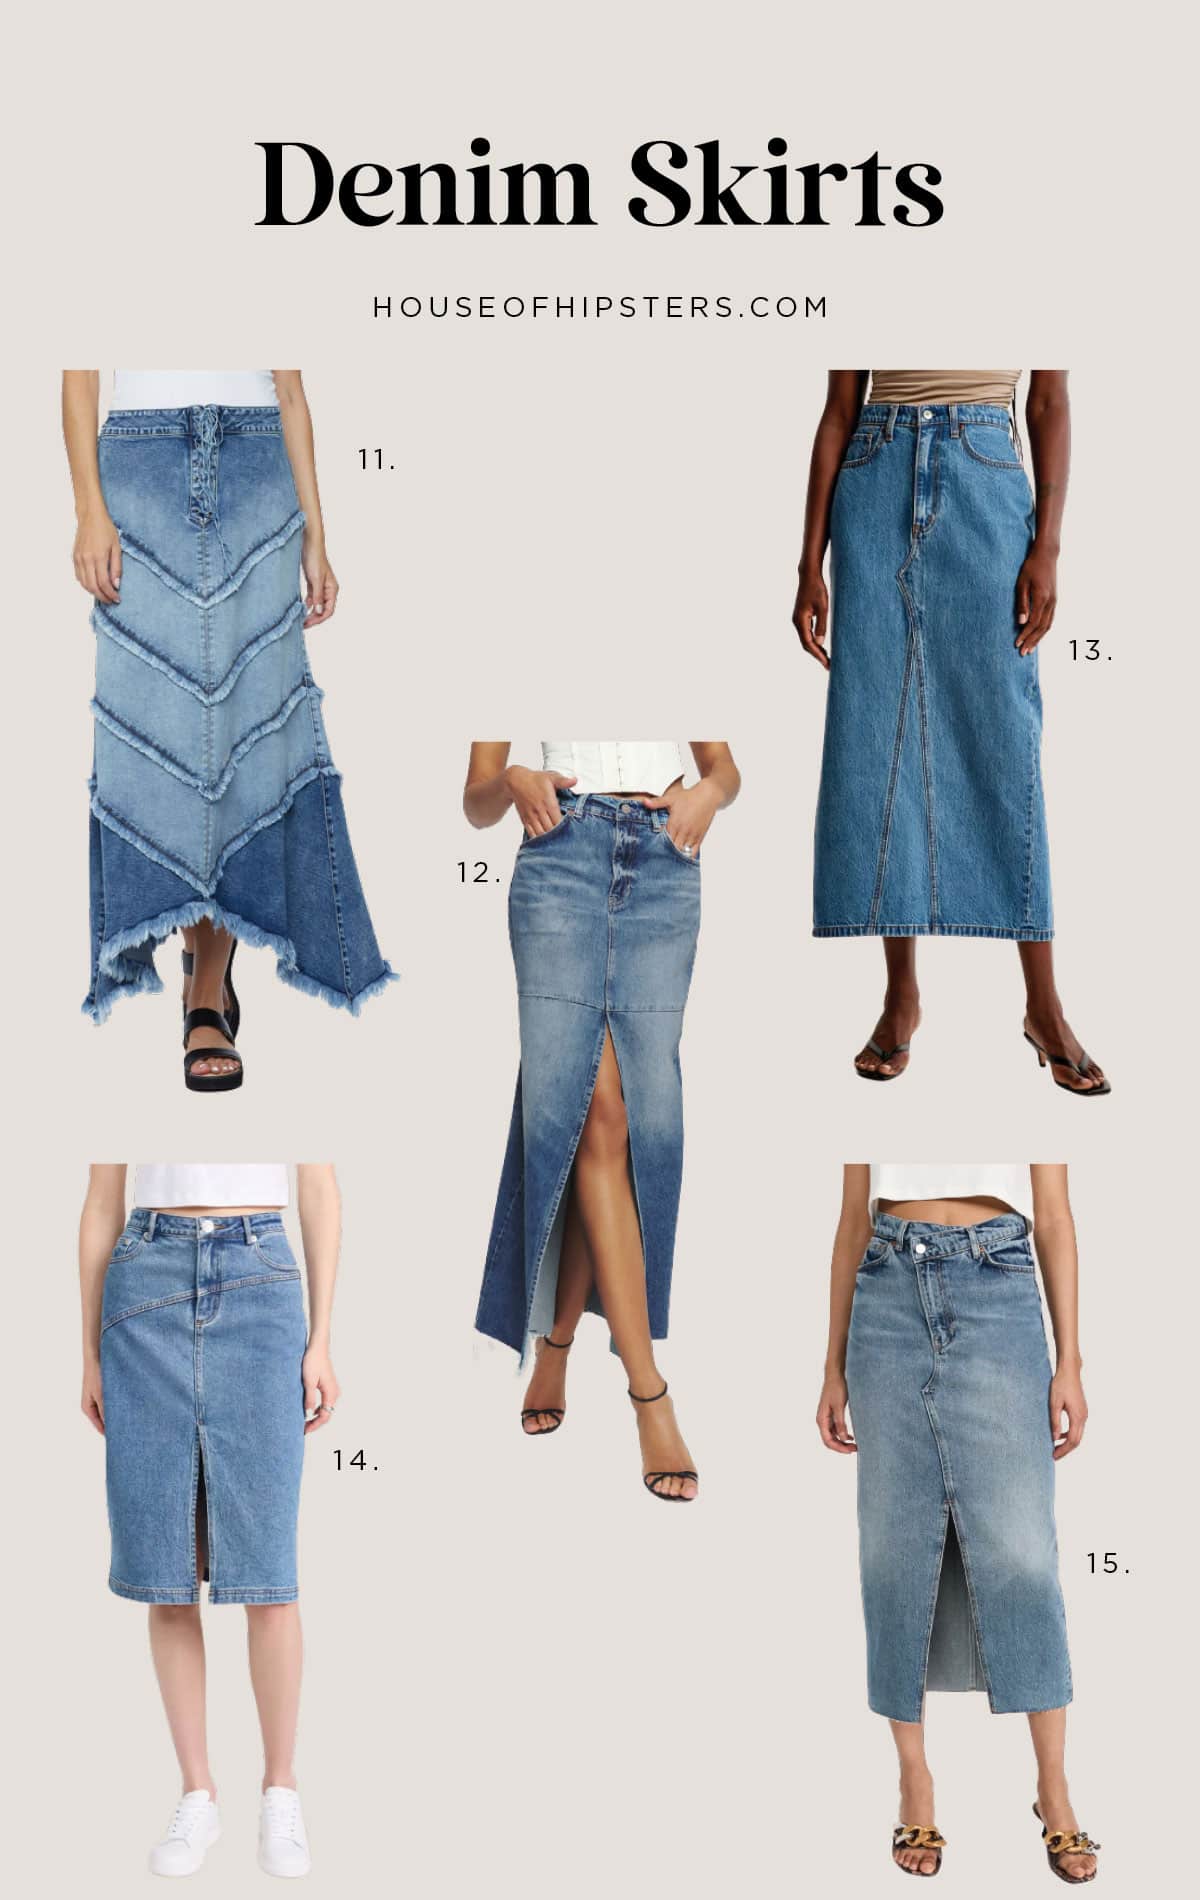 17 Long Denim Skirts - Find the best denim skirts to fit your budget with this round up of my favorite fall fashion style, the long denim skirt.